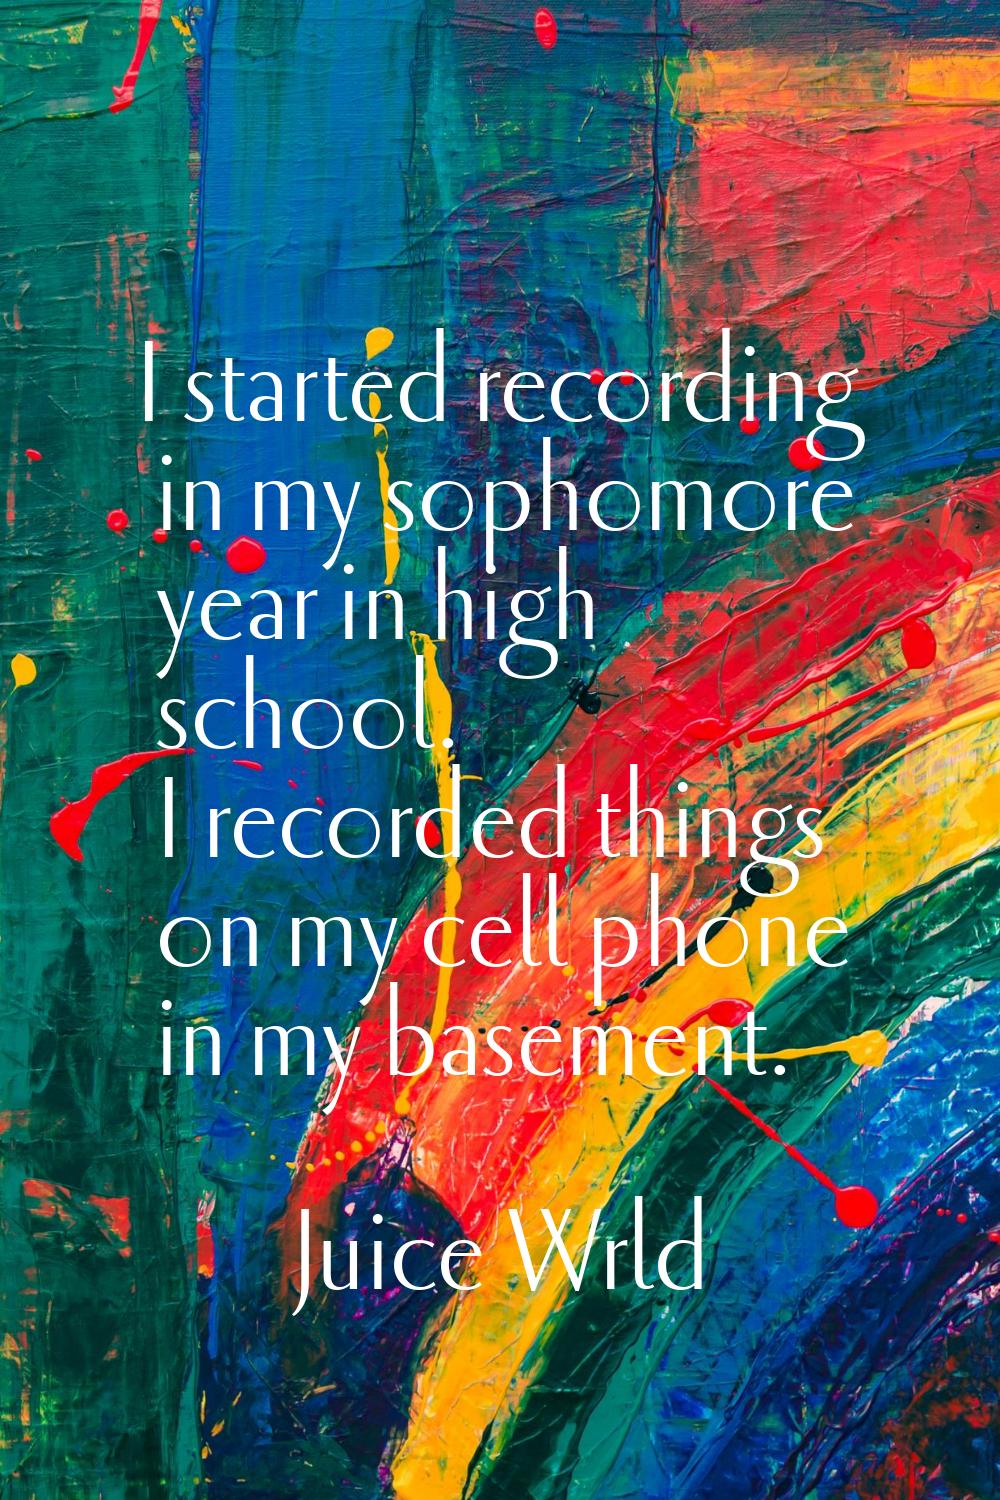 I started recording in my sophomore year in high school. I recorded things on my cell phone in my b